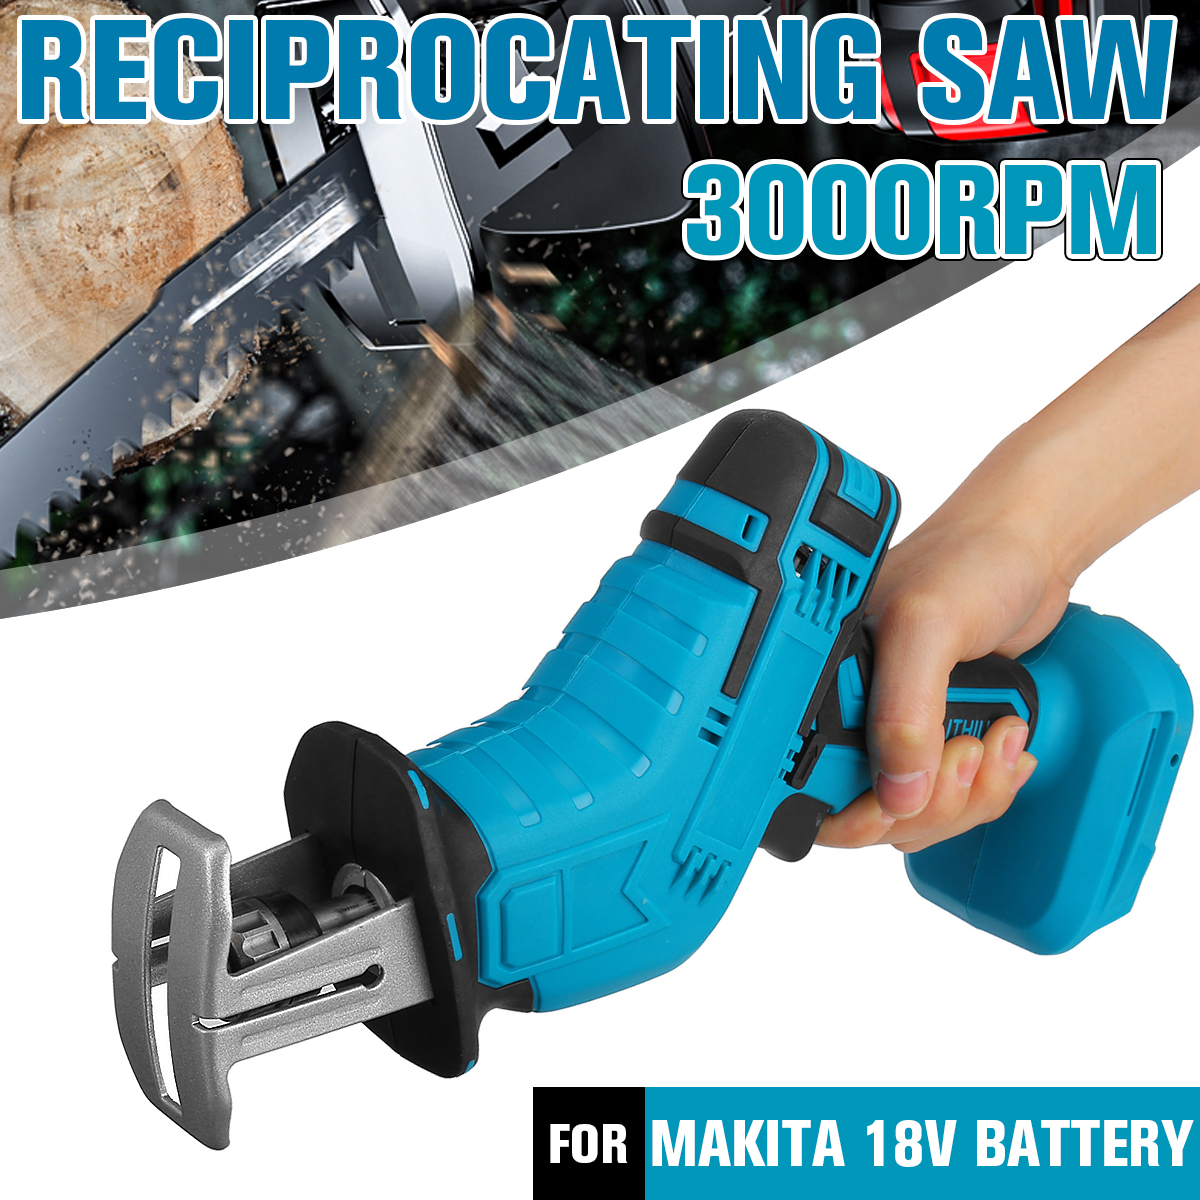 VIOLEWORKS-10mm-Cordless-Reciprocating-Saw-3000rpm-Saw-Replacement-Variable-Speed-For-Makita-18V-Bat-1673434-2